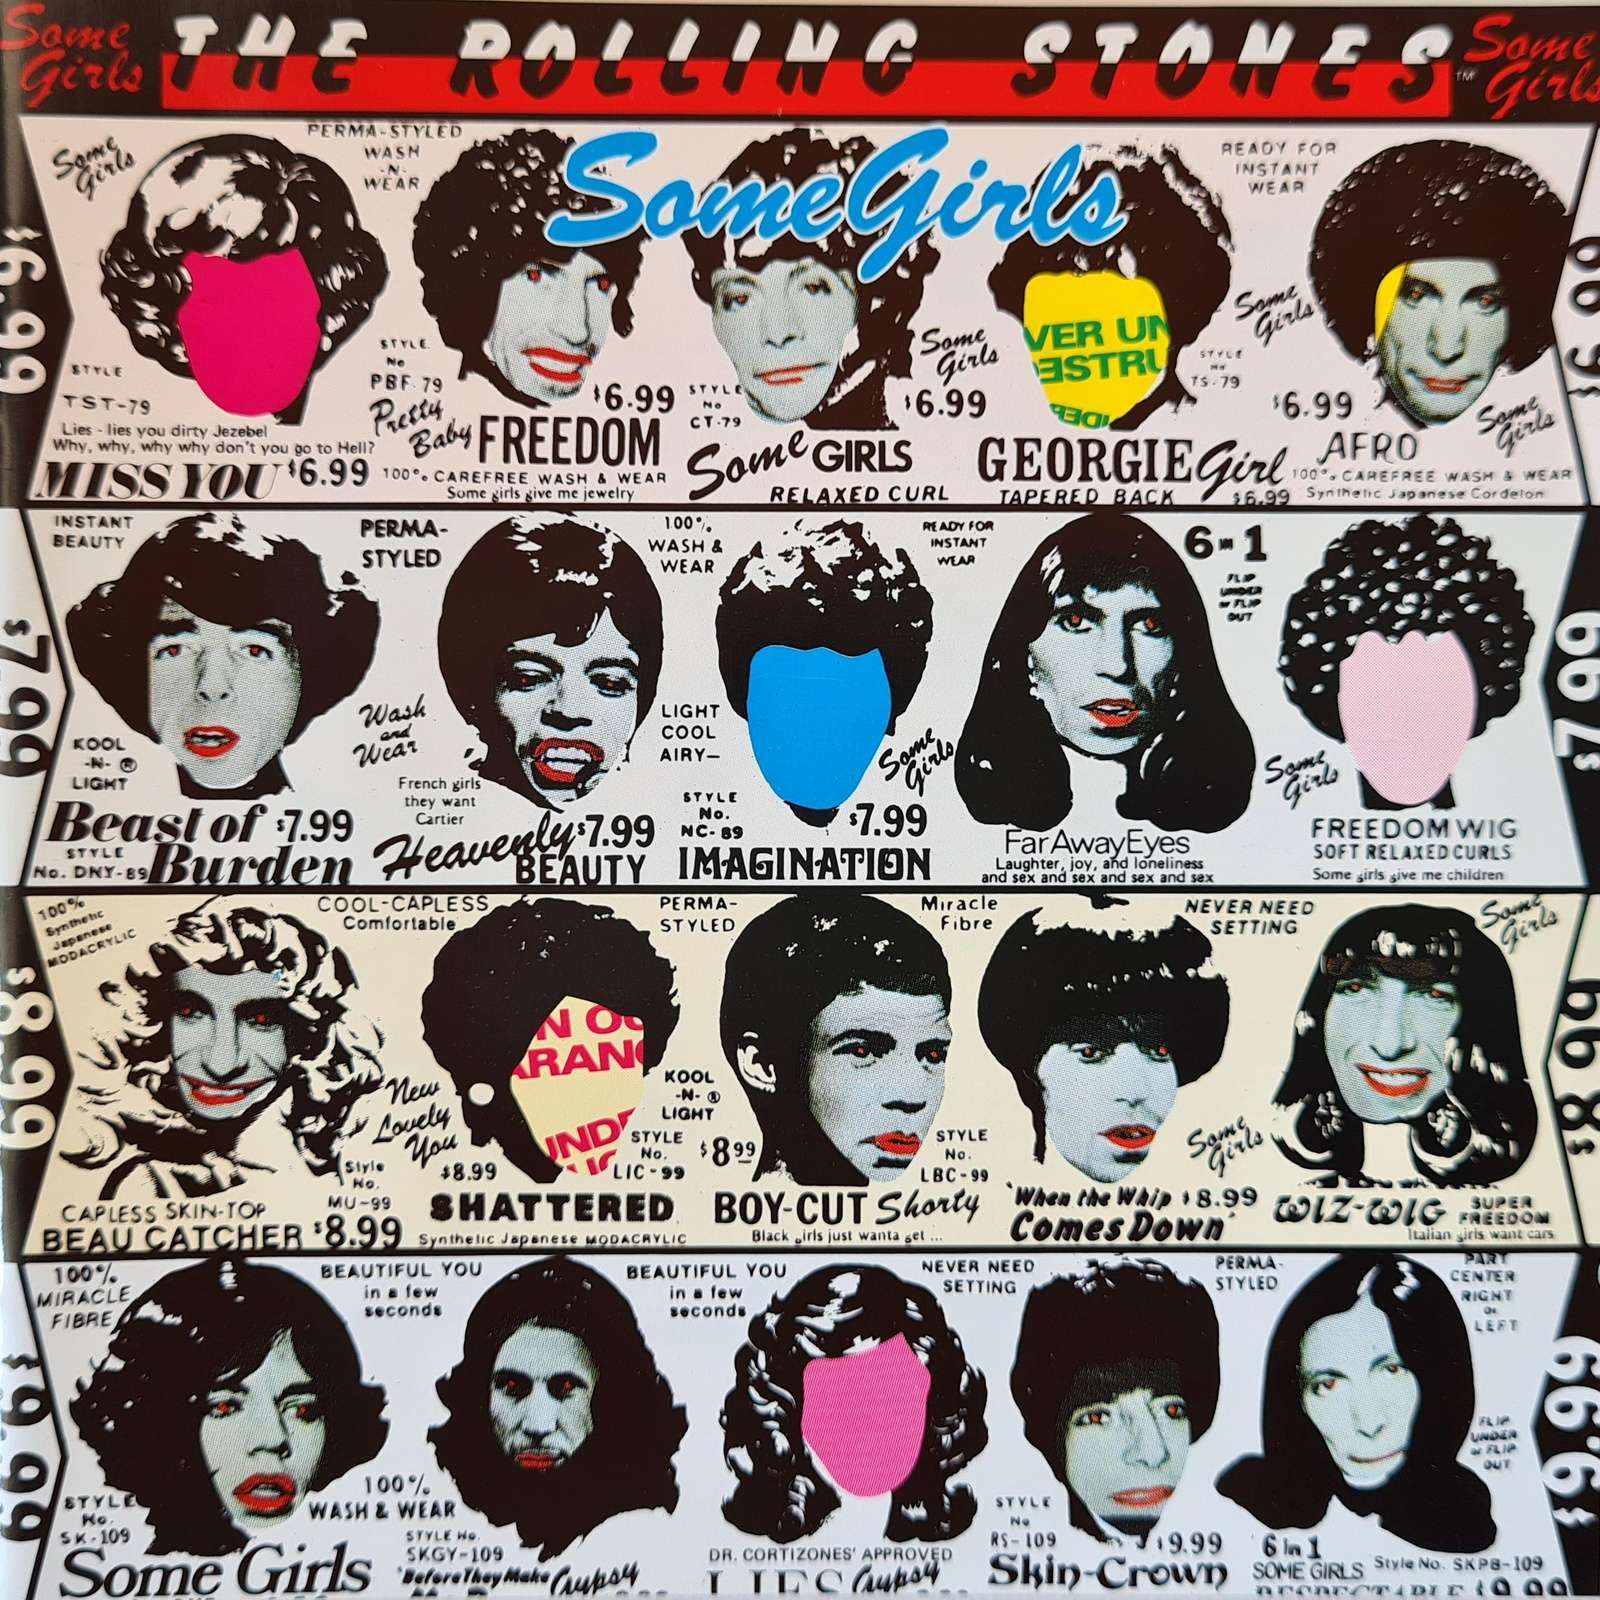 The Rolling Stones - Some Girls (CD)